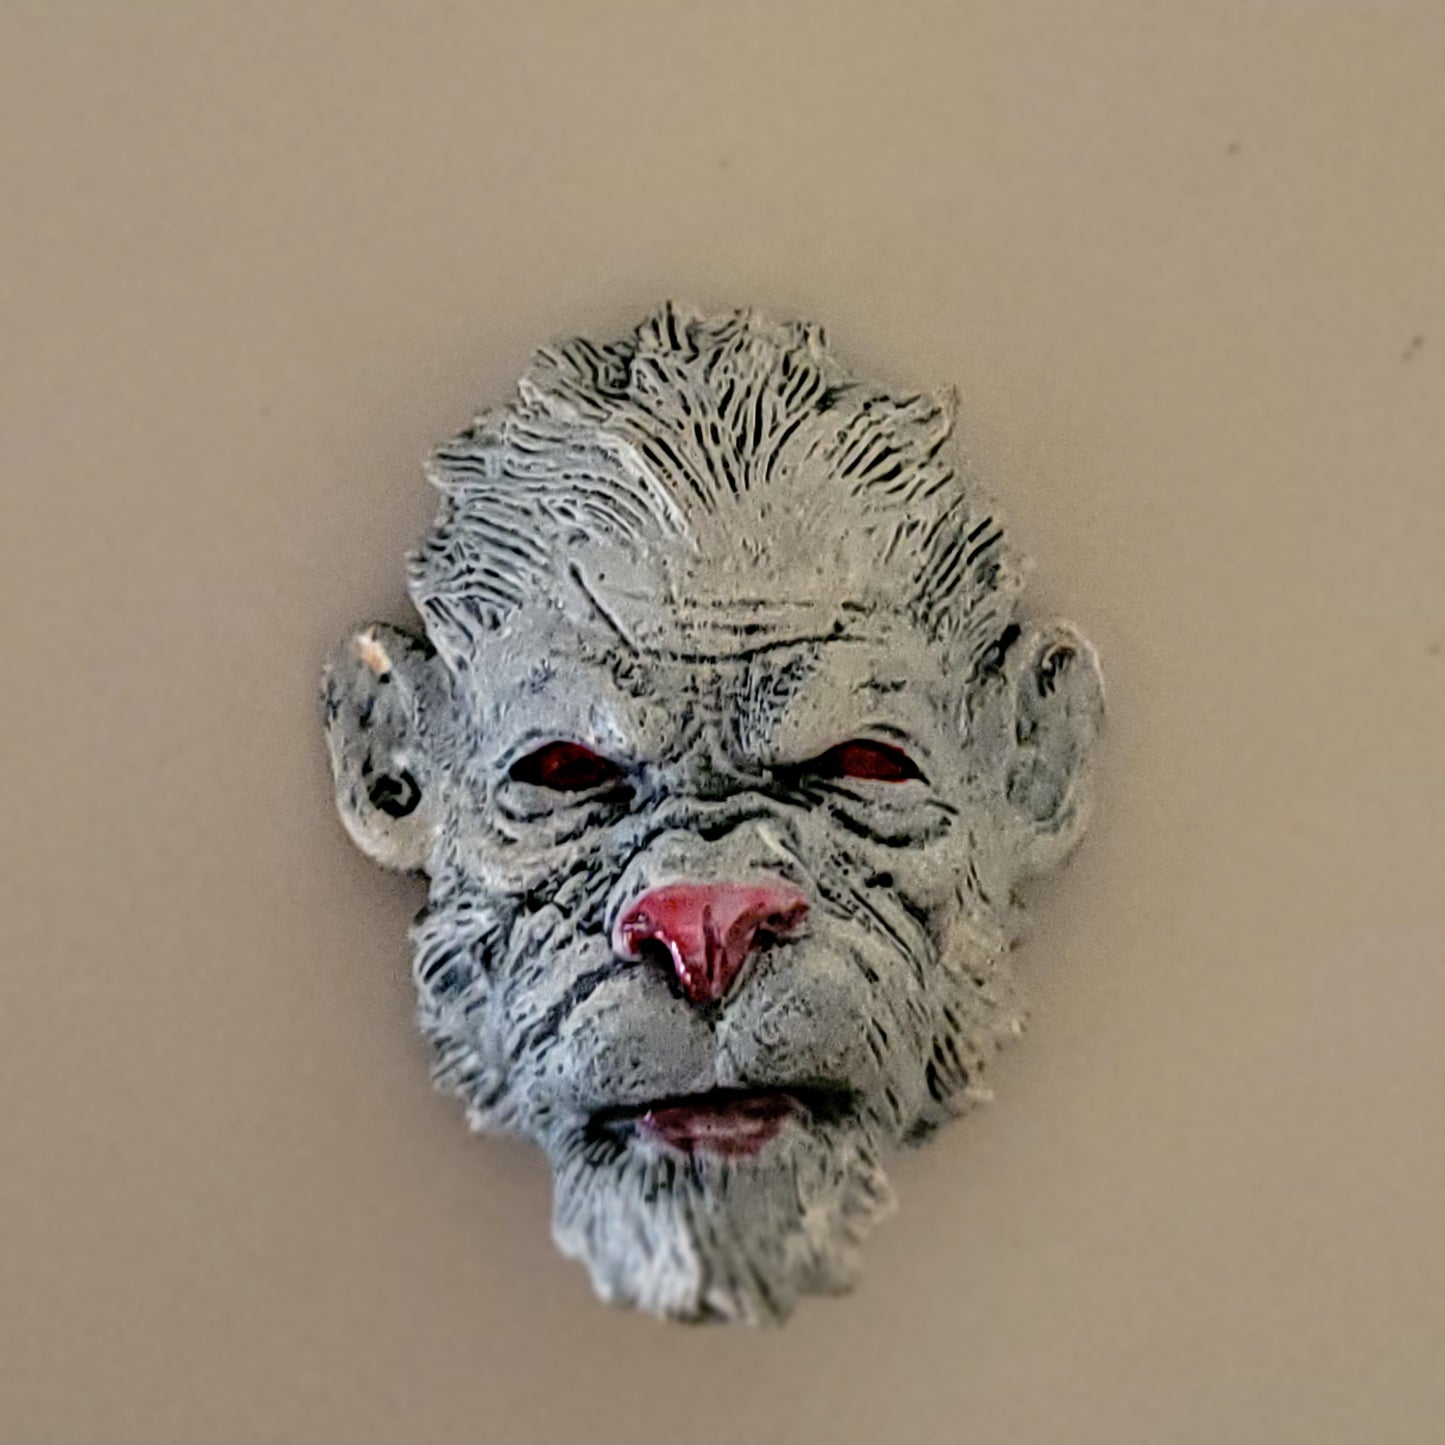 Alabama White Thang 3D Sculpted Magnet: Capturing Southern Folklore Charm